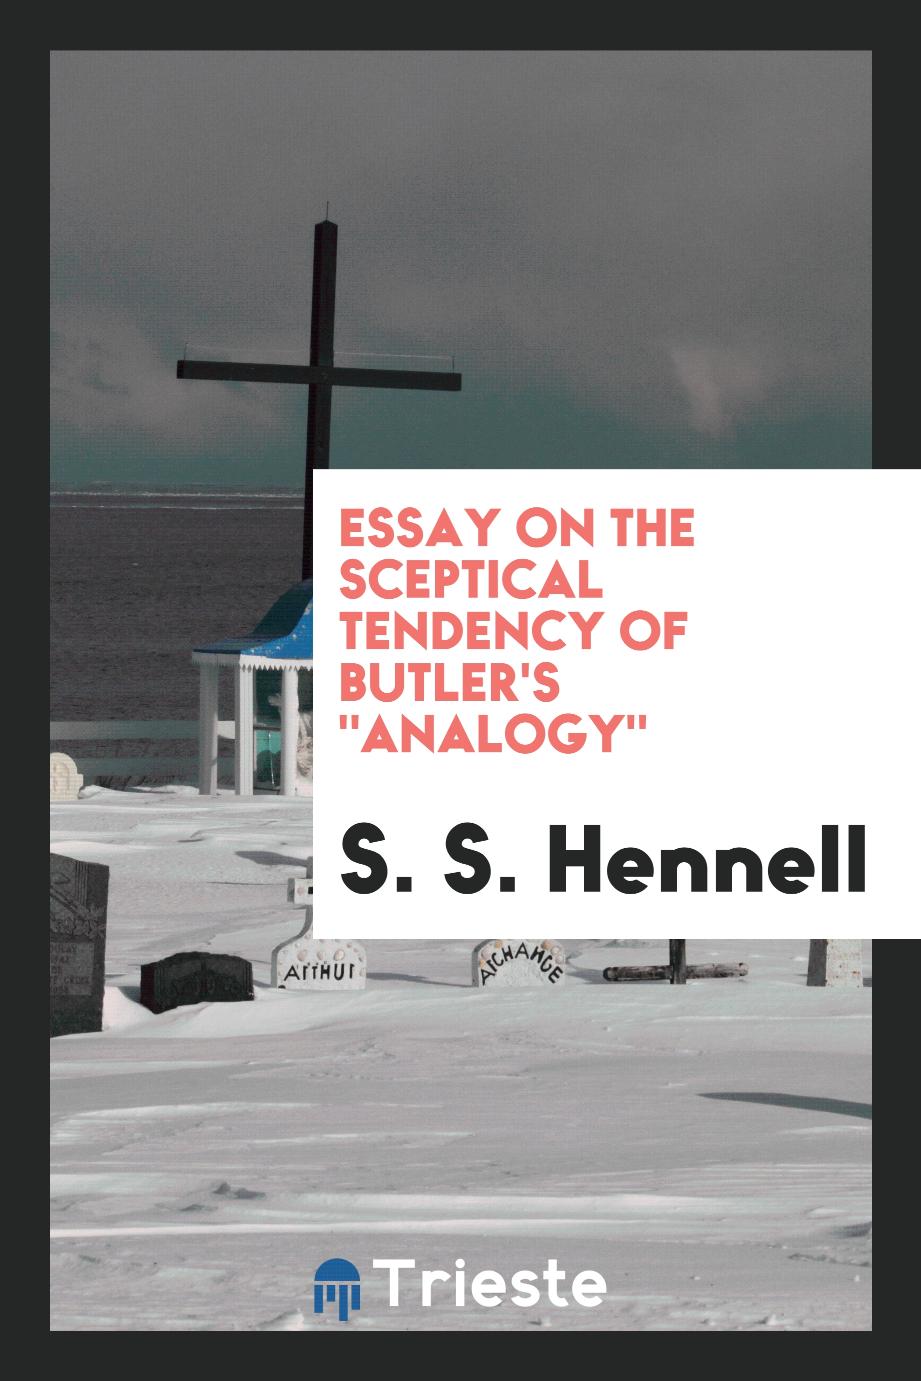 Essay on the Sceptical Tendency of Butler's "Analogy"